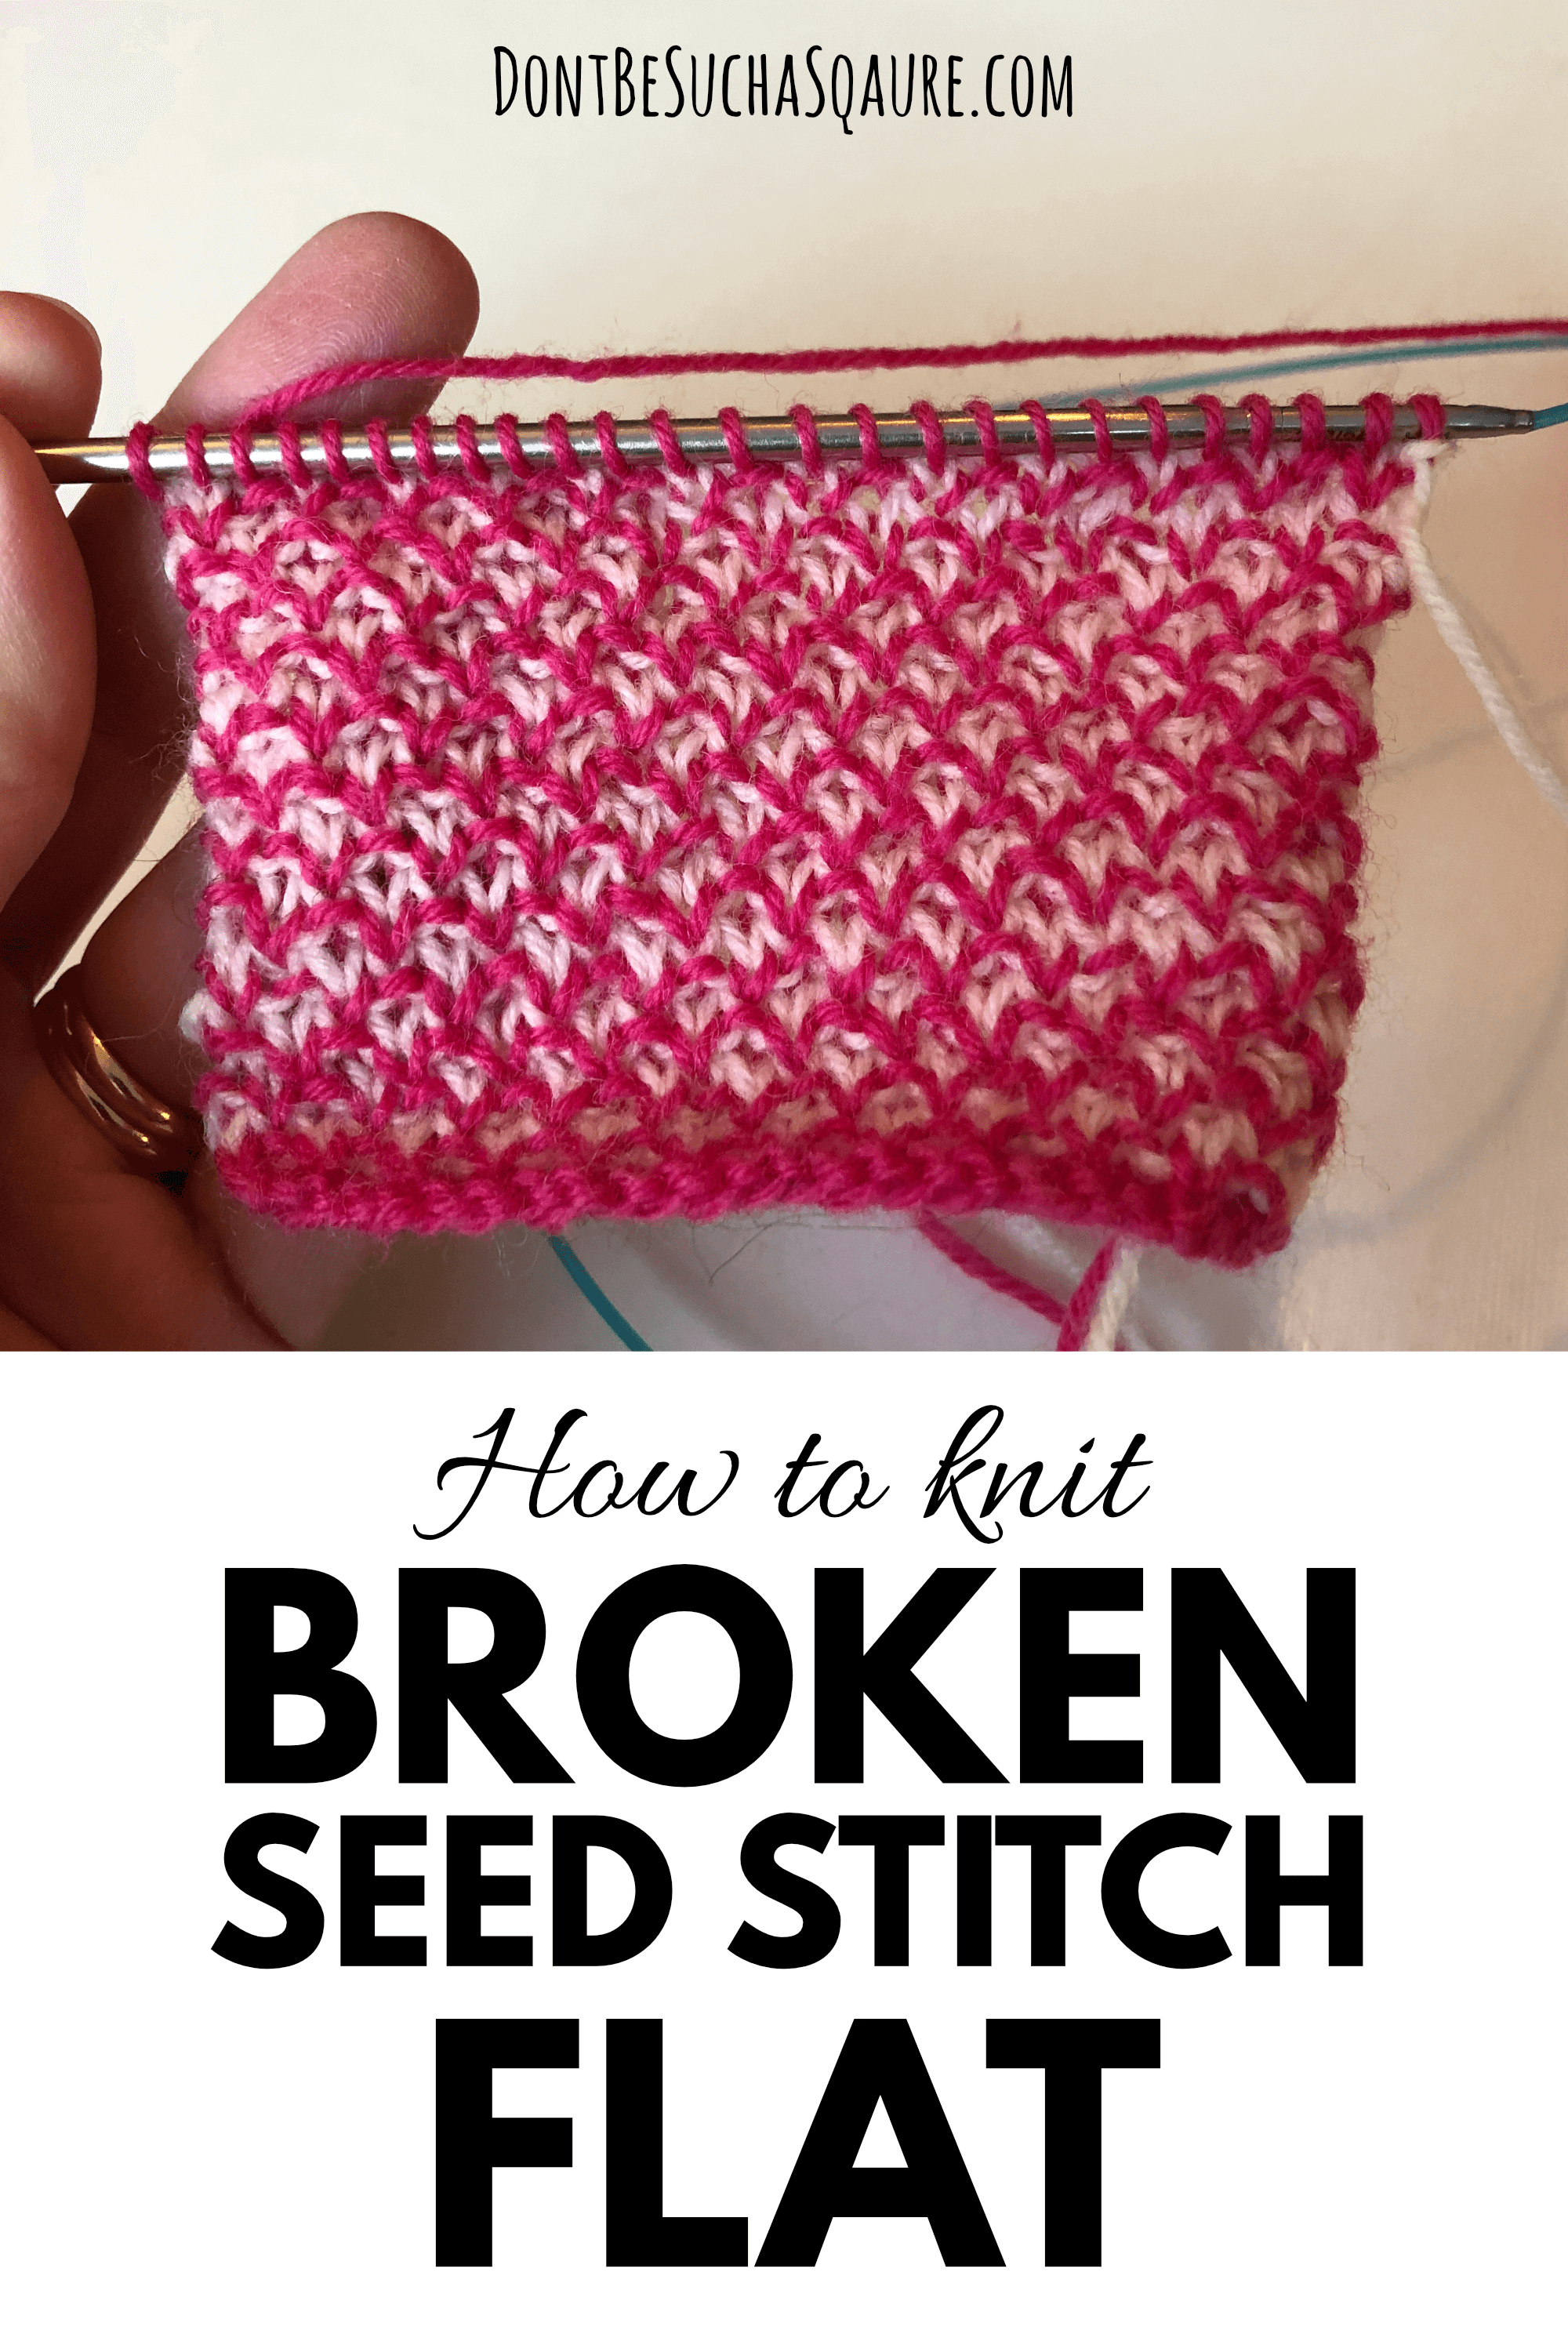 An image of a hand holding a knitting needle with a piece of two color brocken seed stitch knitted flat. Under is the text "How to kit broken seed stitch flat"